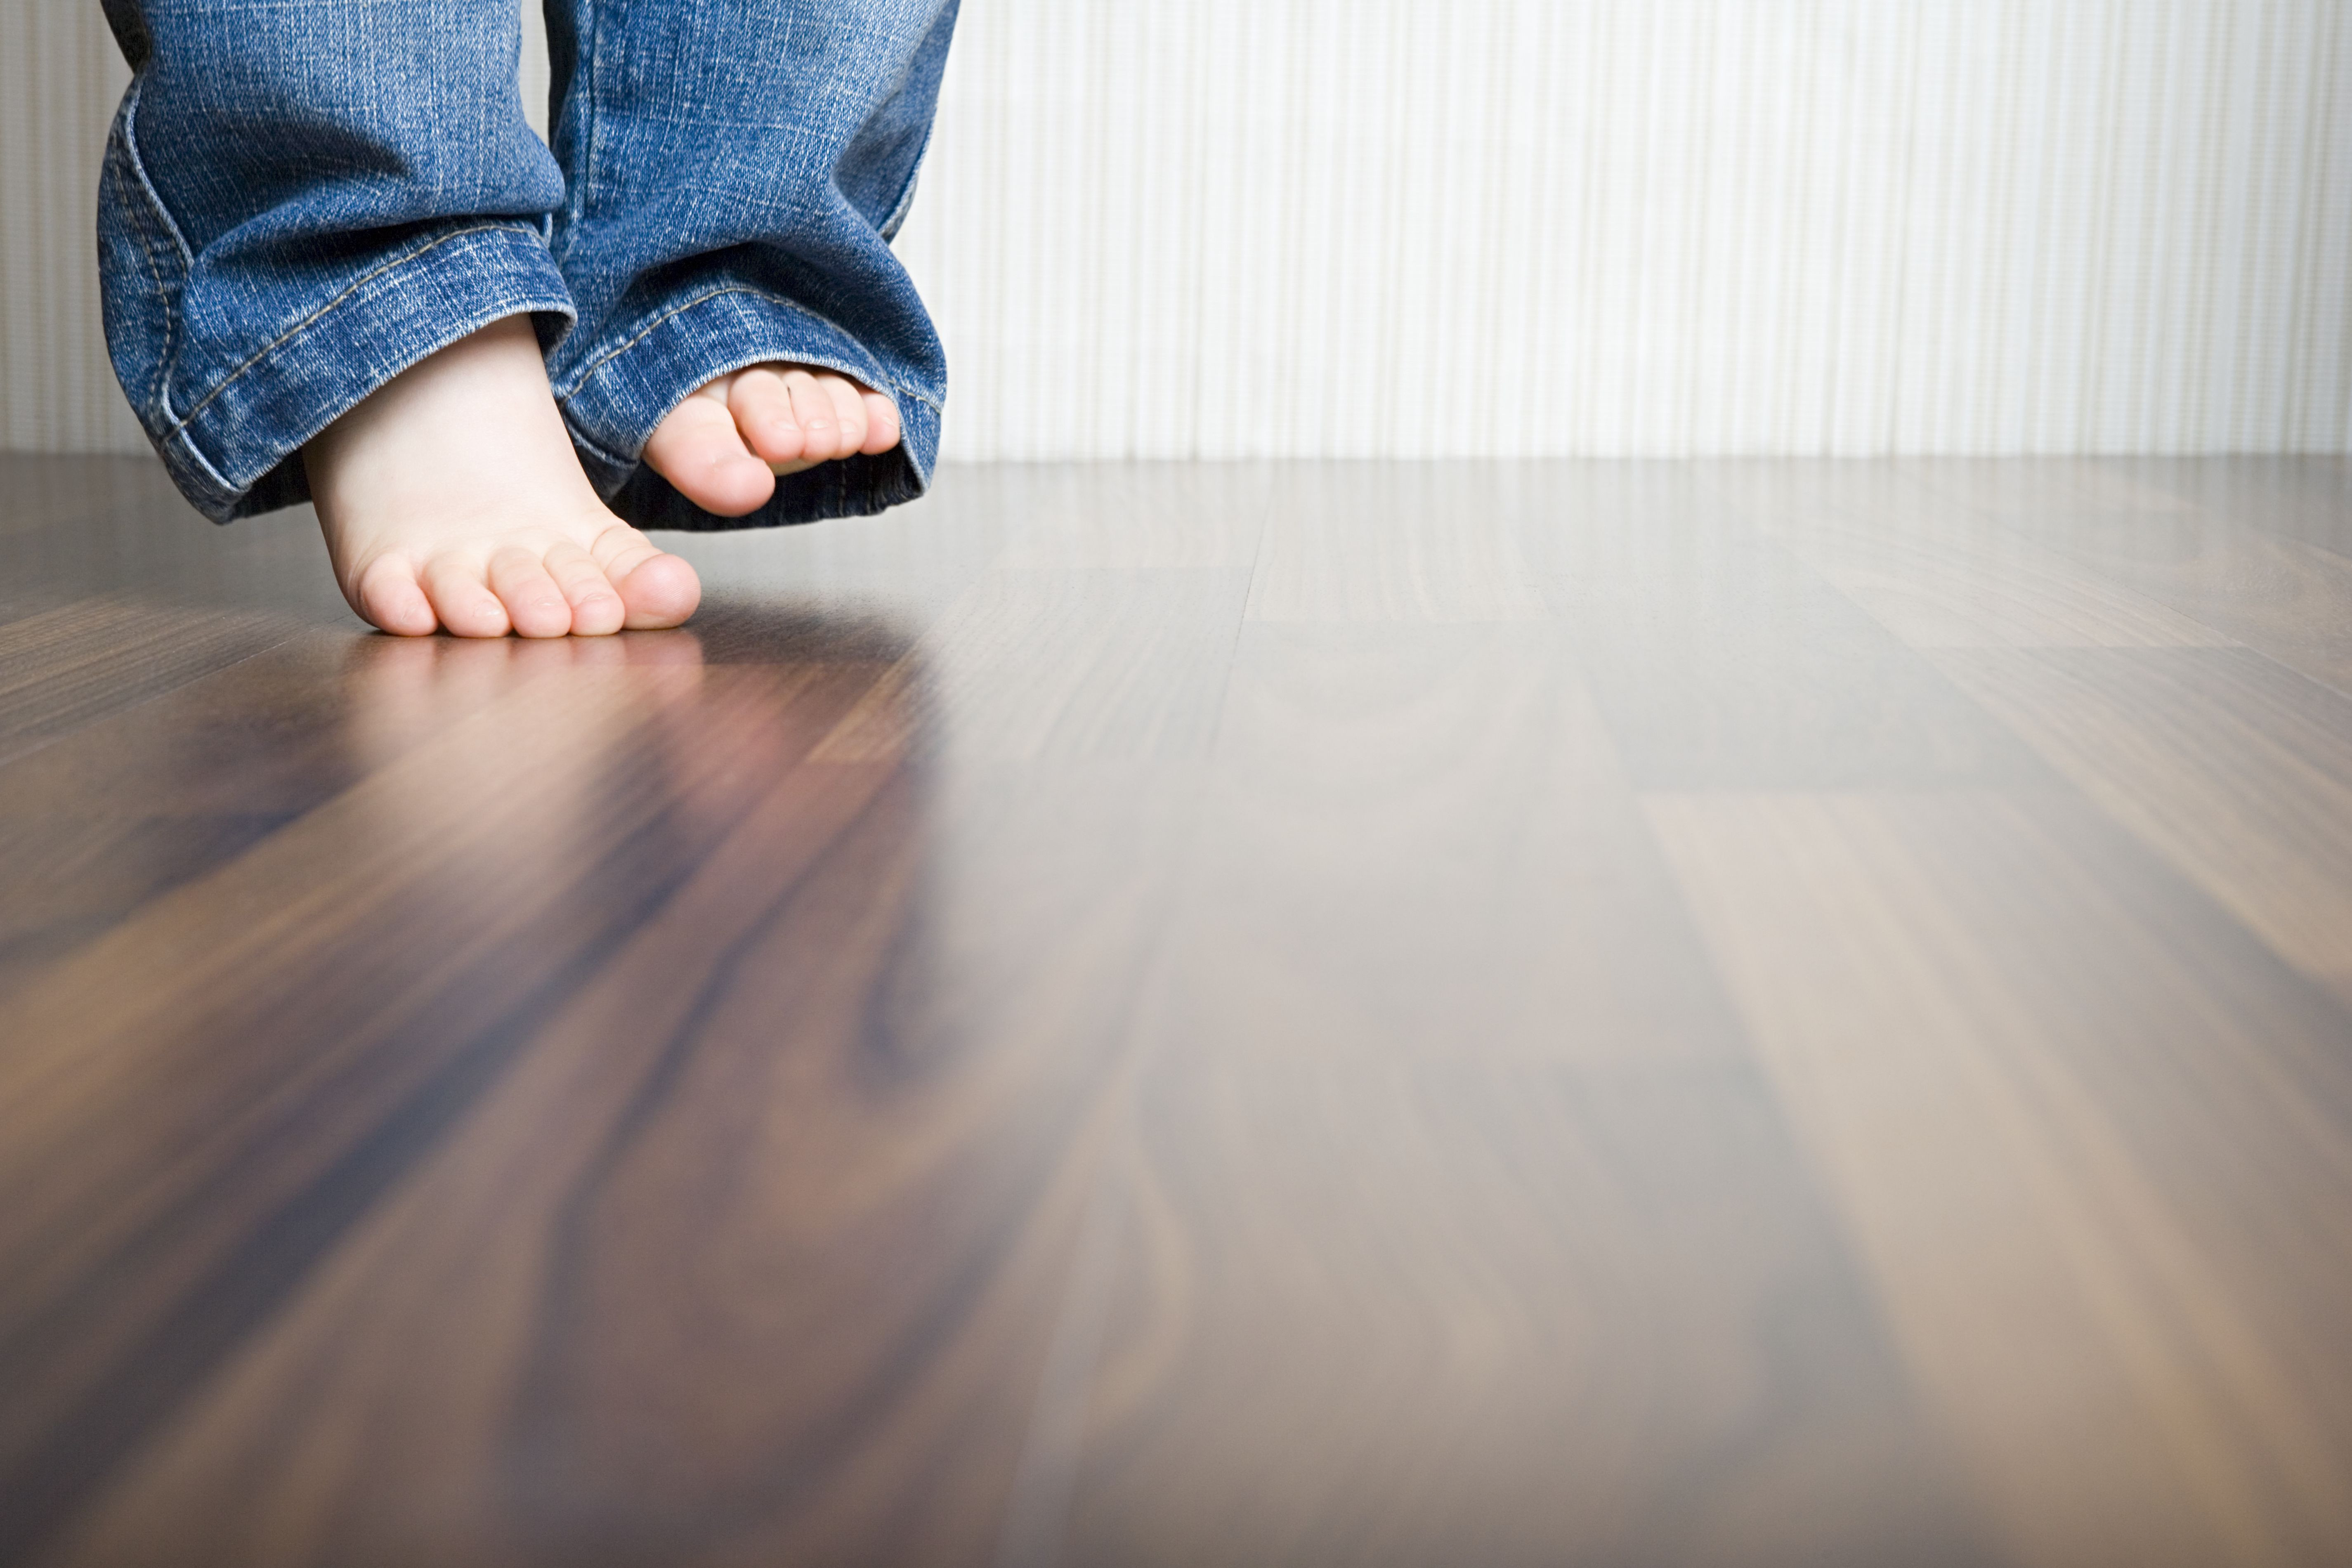 hardwood floor vacuum and steam cleaner of how to clean hardwood floors best way to clean wood flooring throughout 1512149908 gettyimages 75403973